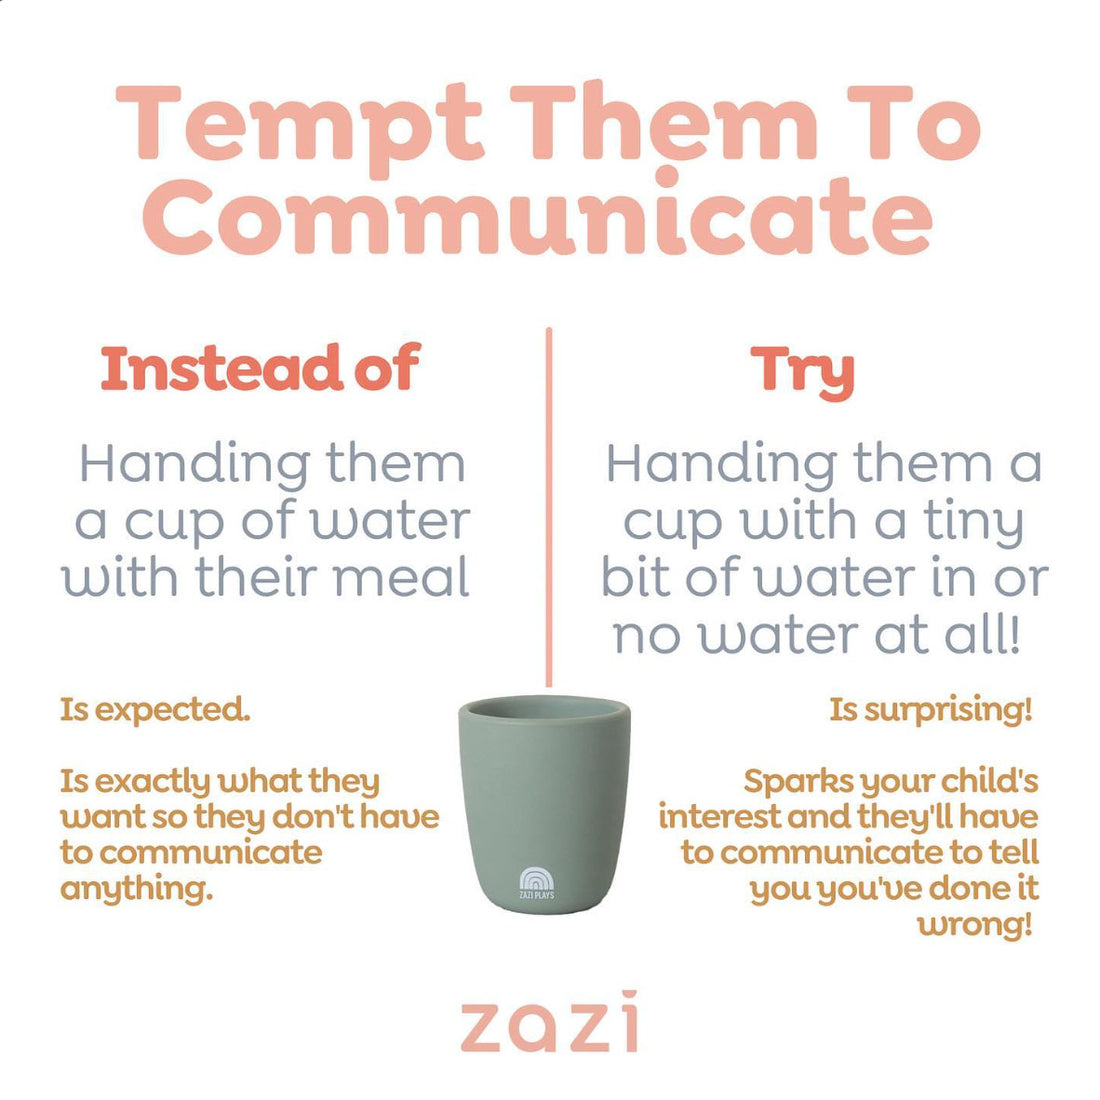 Tempt them to Communicate